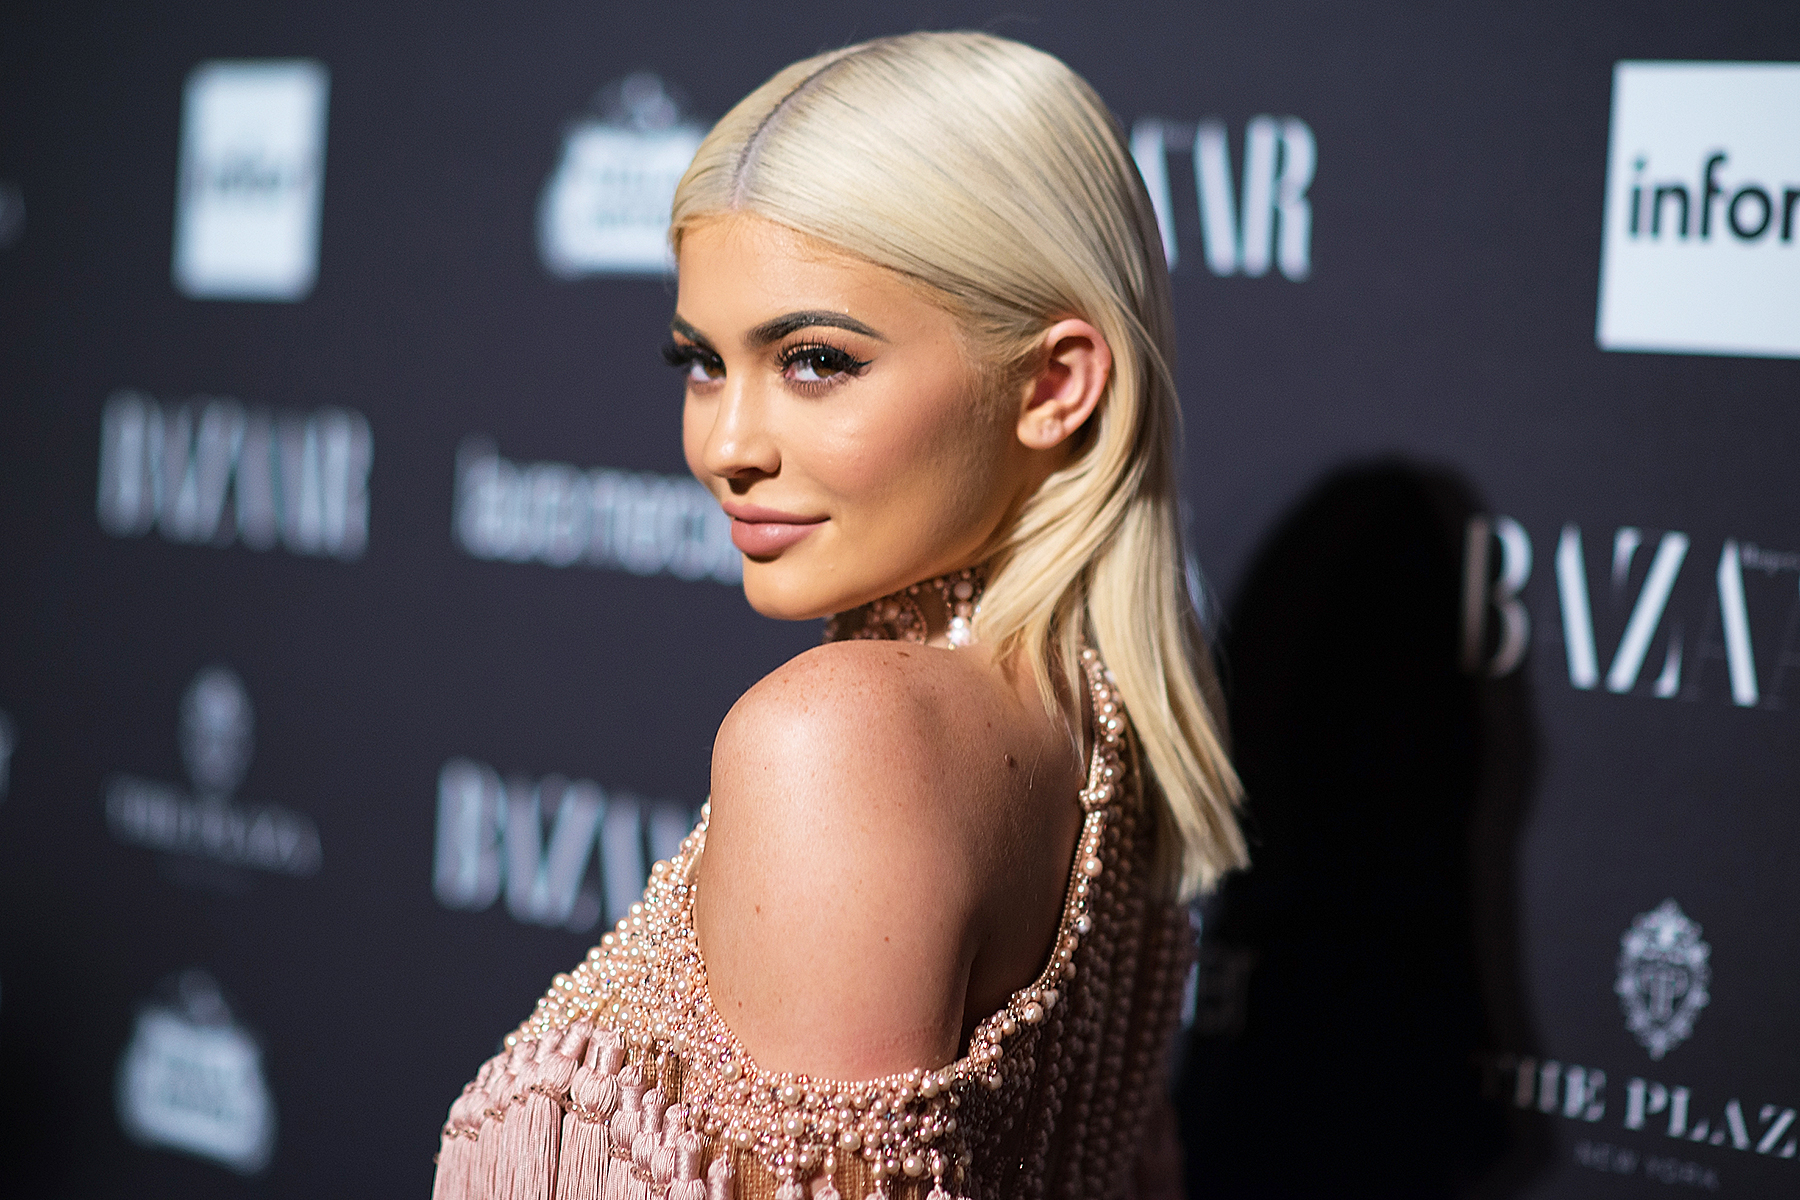 Kylie Jenner Hides Baby Bump in Calvin Klein Ad, Twitter Reacts